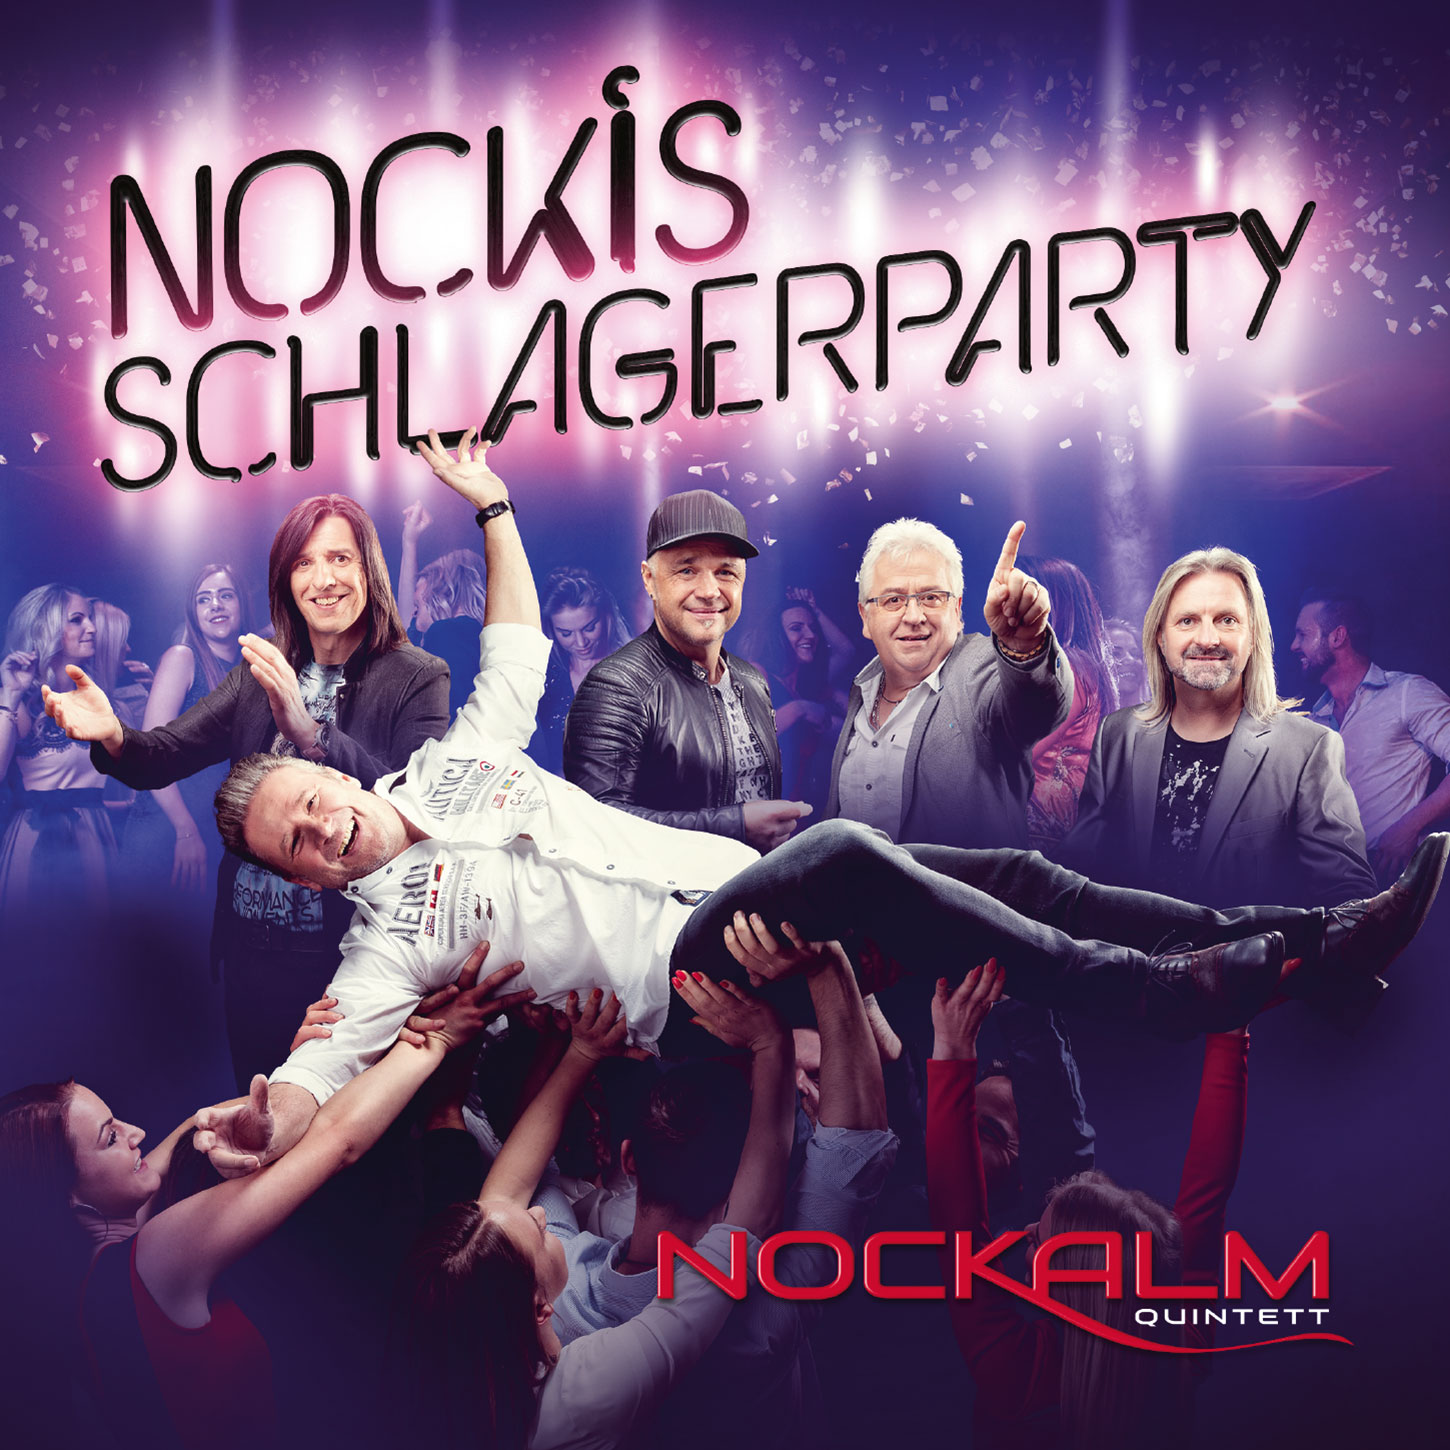 Nockis_Schlagerparty_Cover